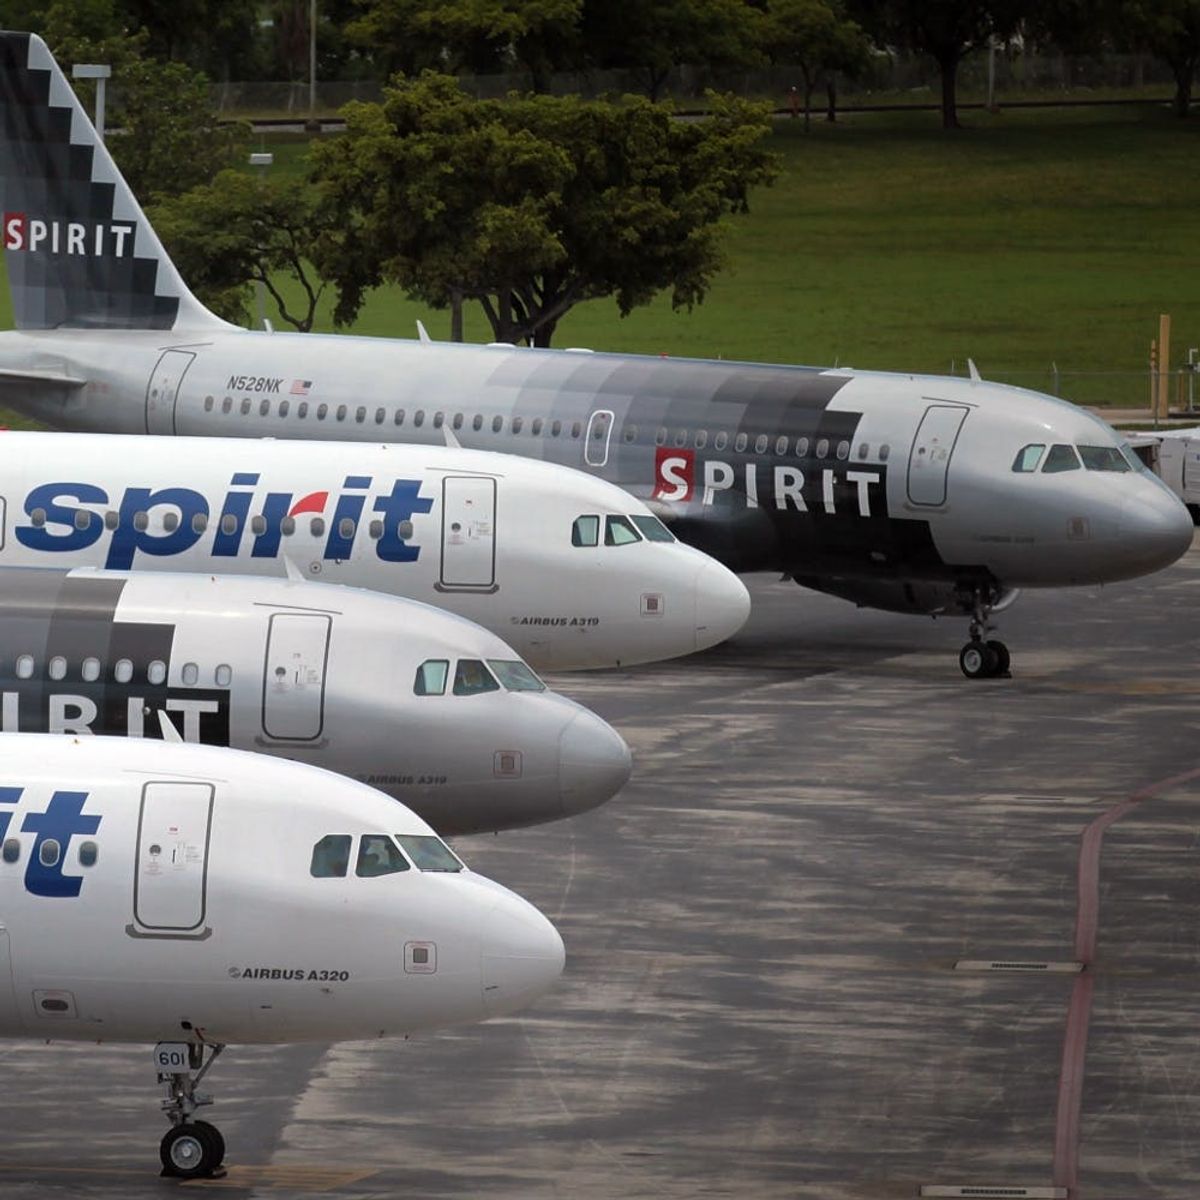 Spirit Airlines Cancels Flights, Fights Break Out, and Twitter Has a Hilarious Meltdown